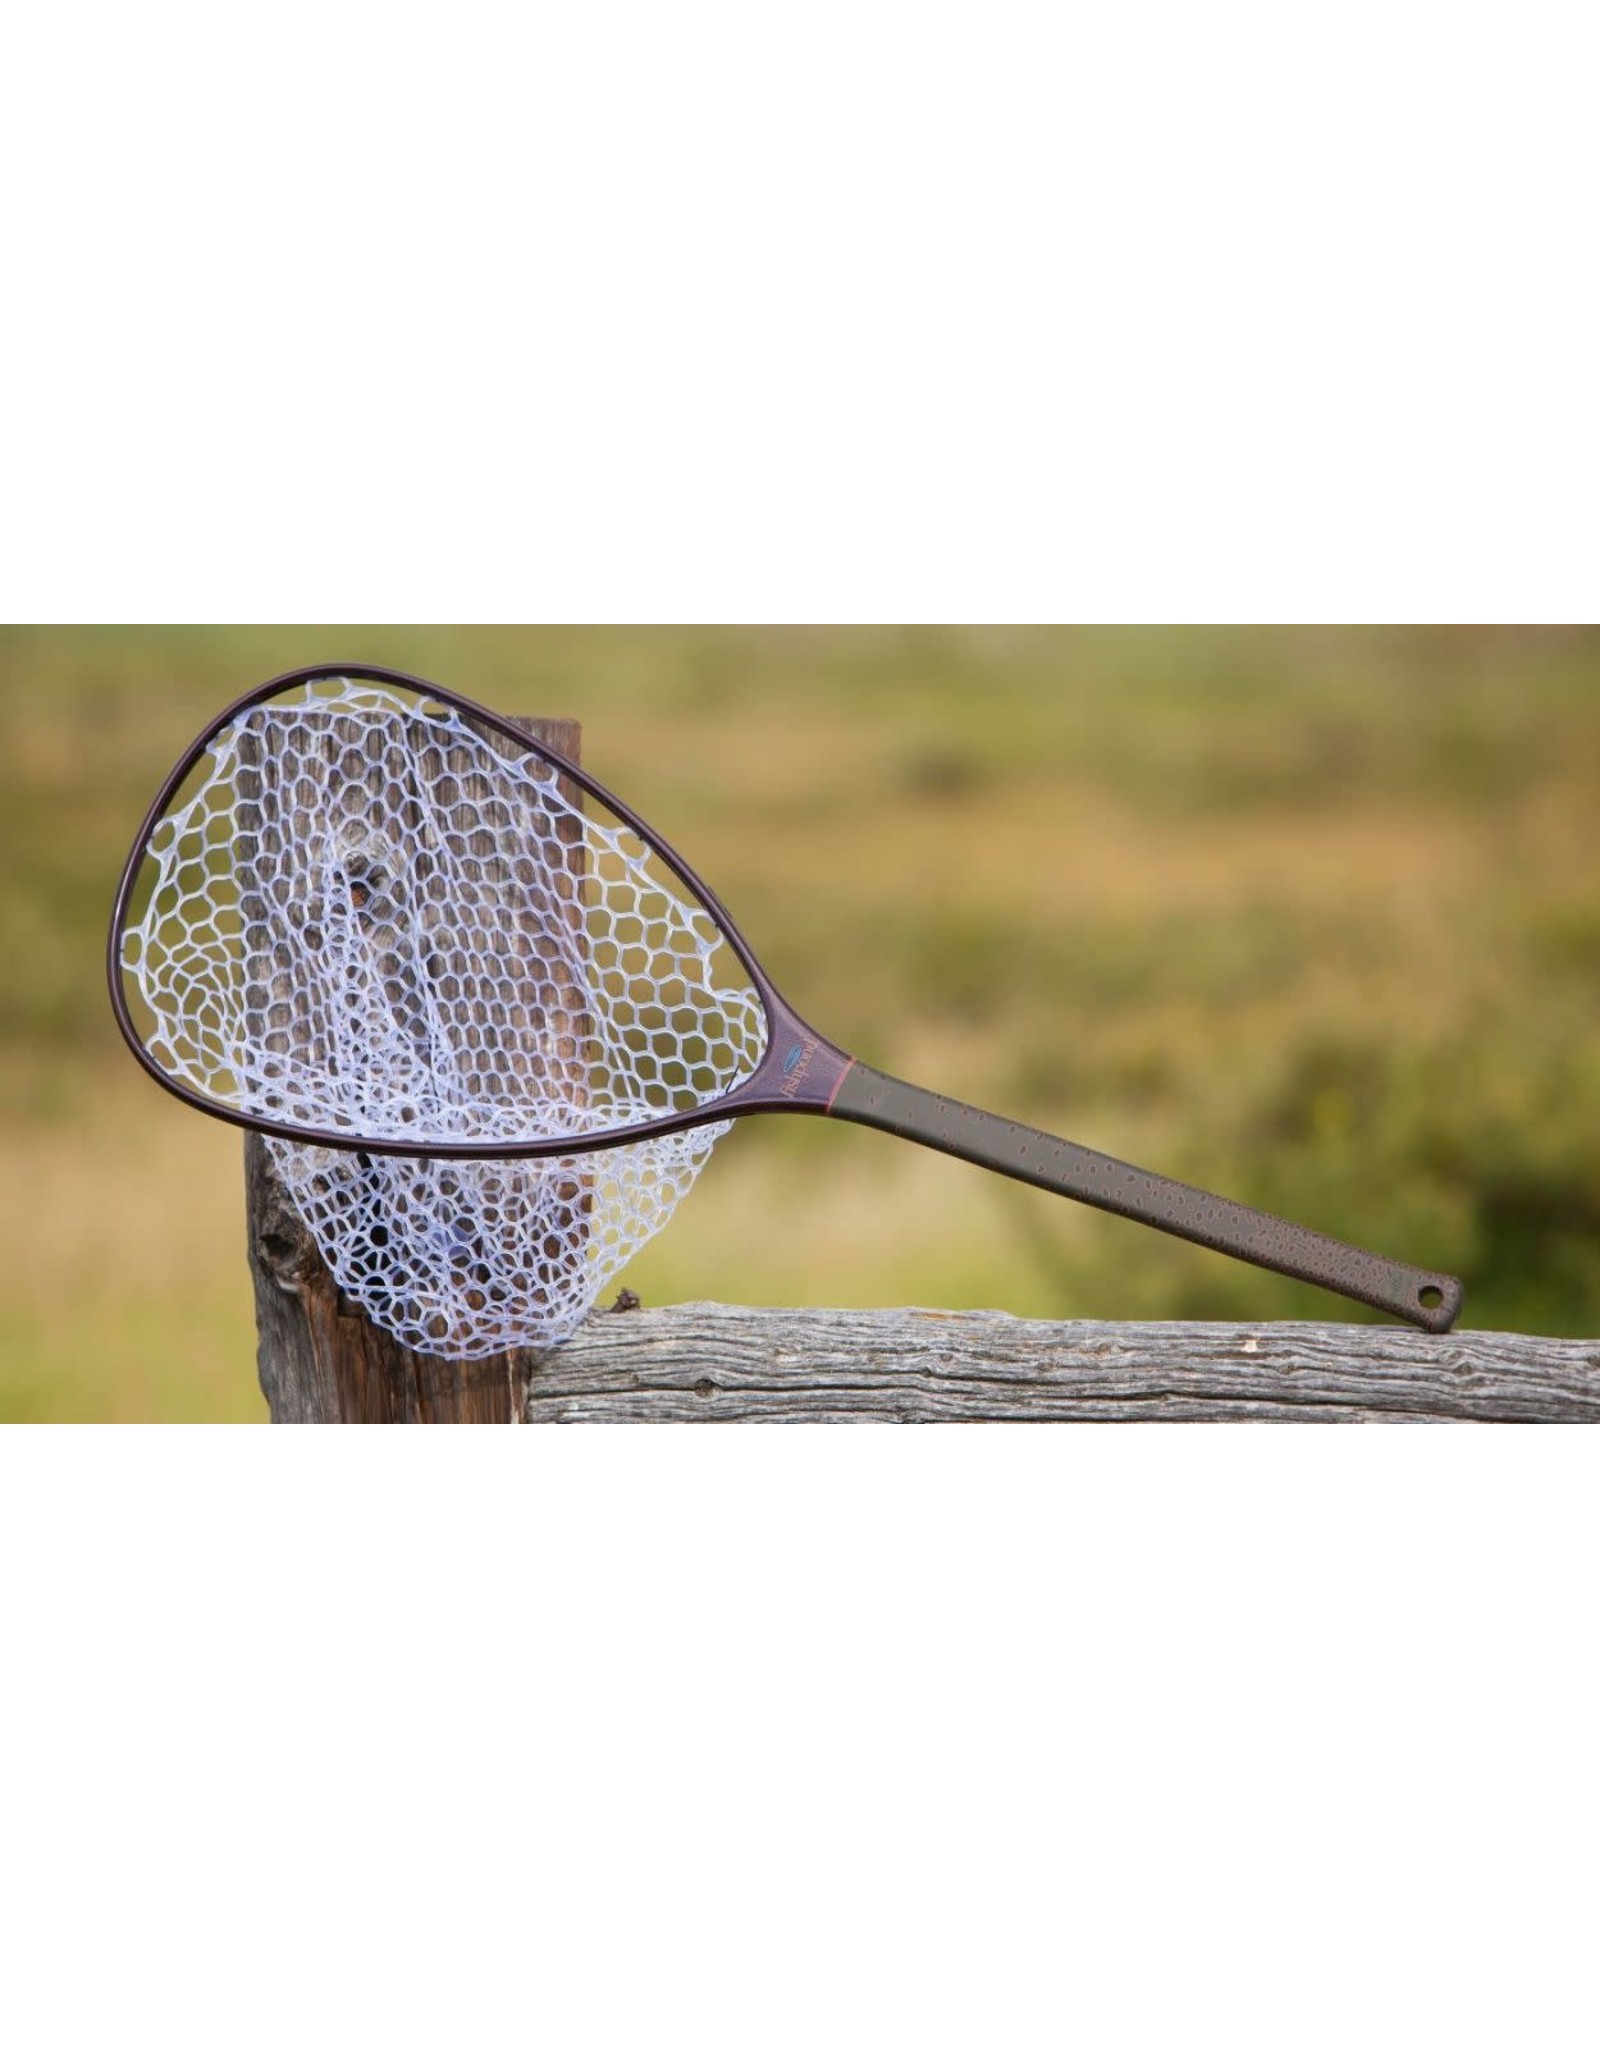 Fishpond Nomad Mid-Length Net (Tailwater)